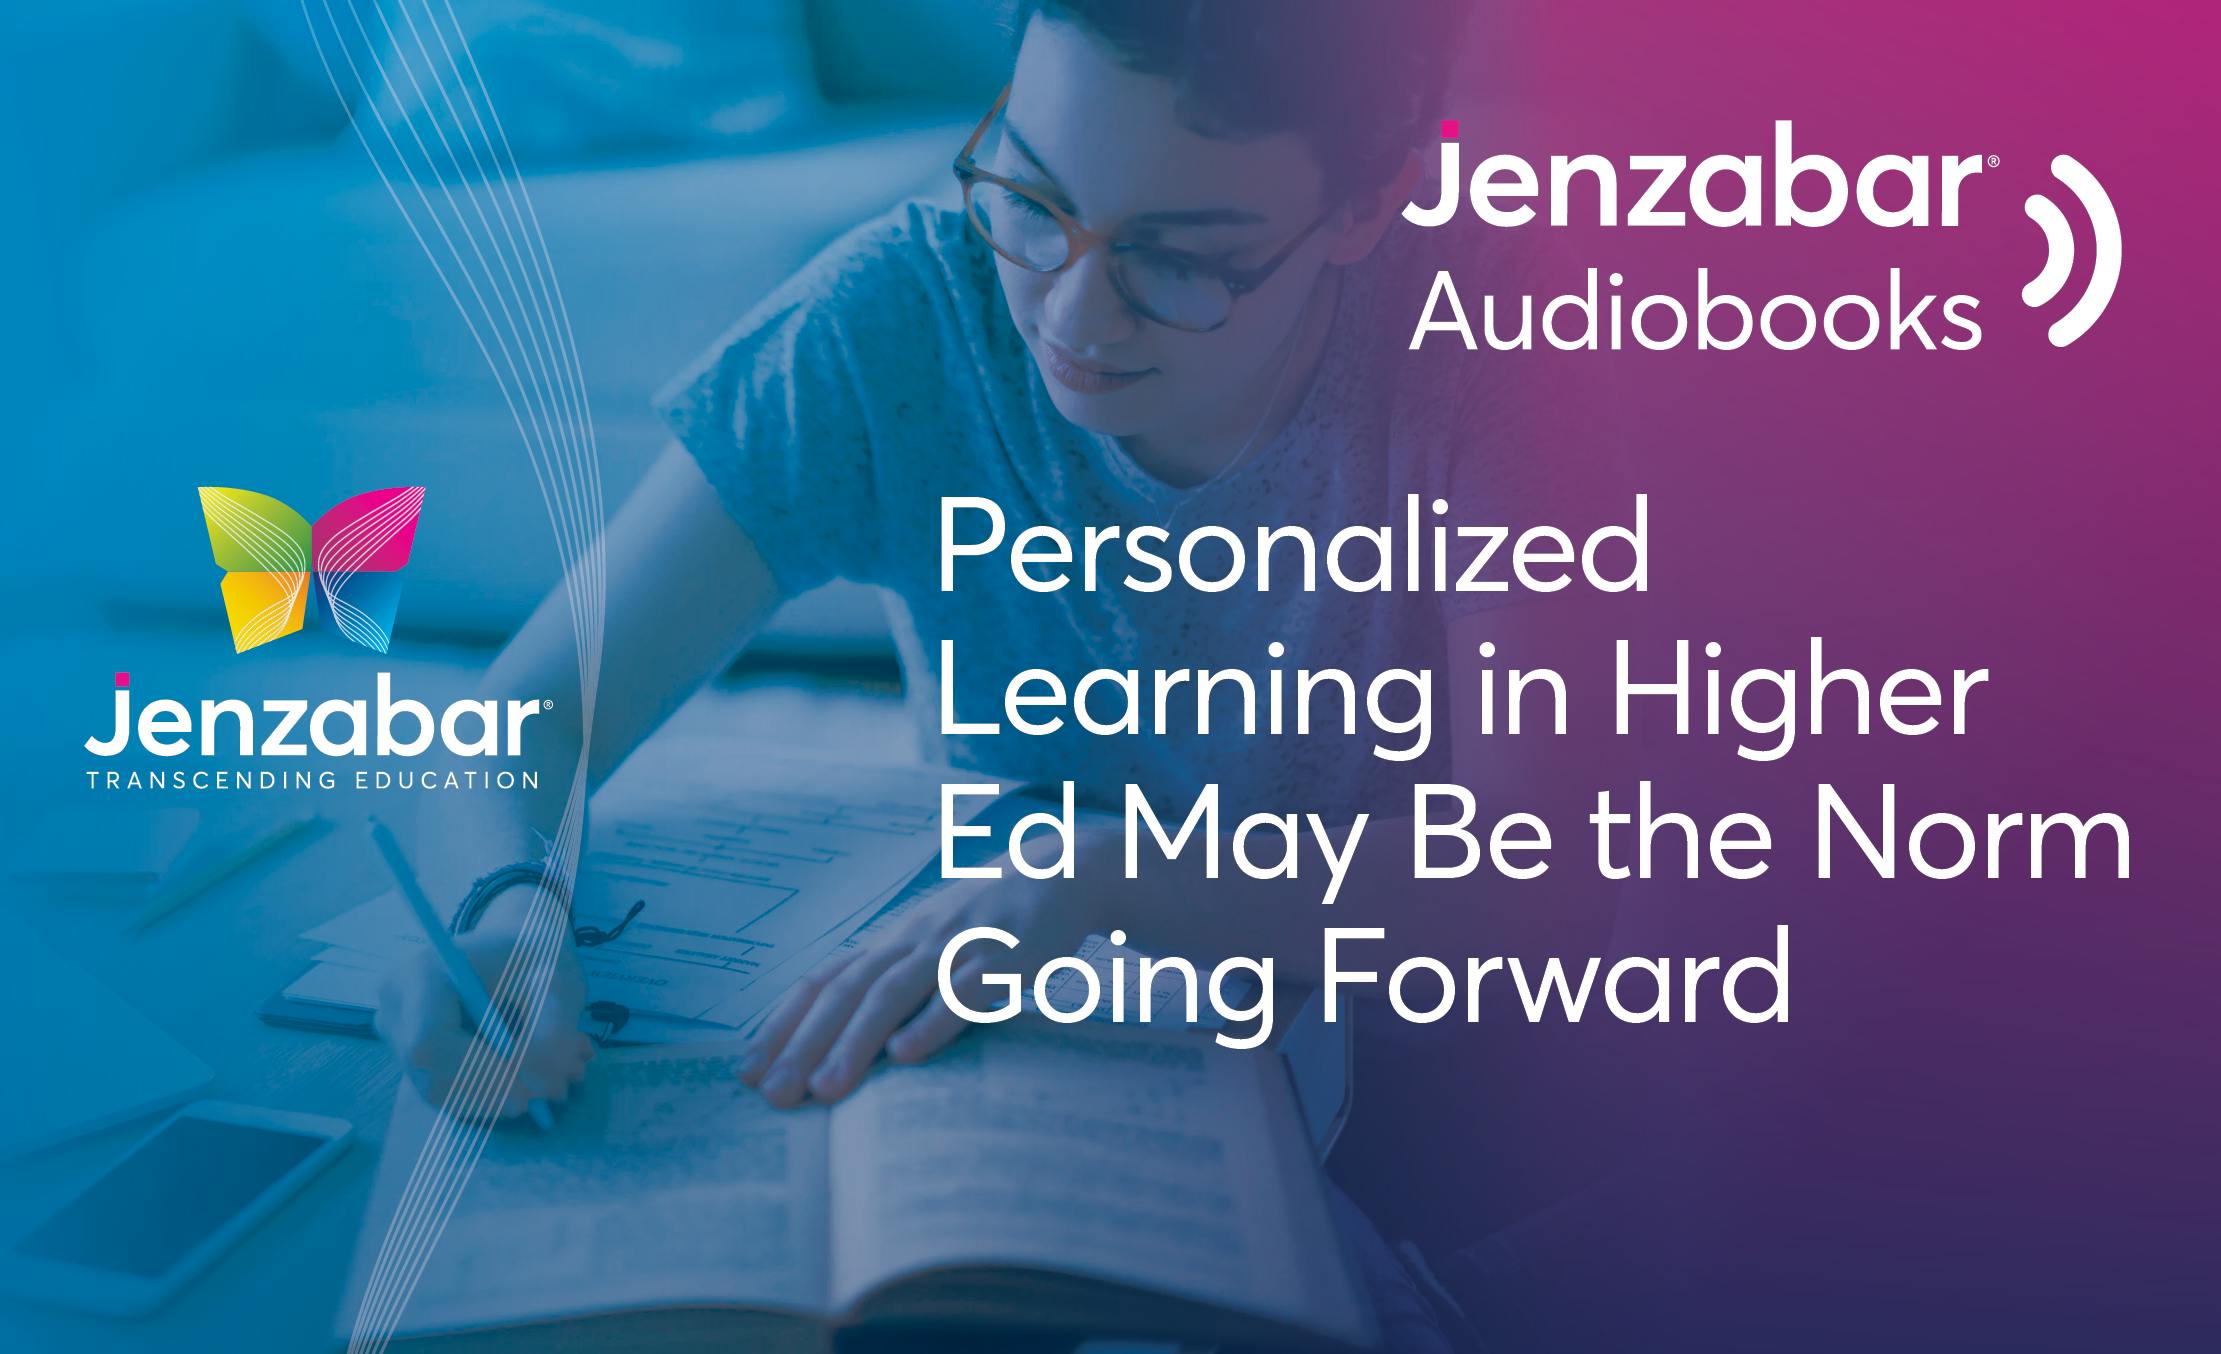 Audiobook: Personalized Learning in Higher Ed May Be the Norm Going Forward